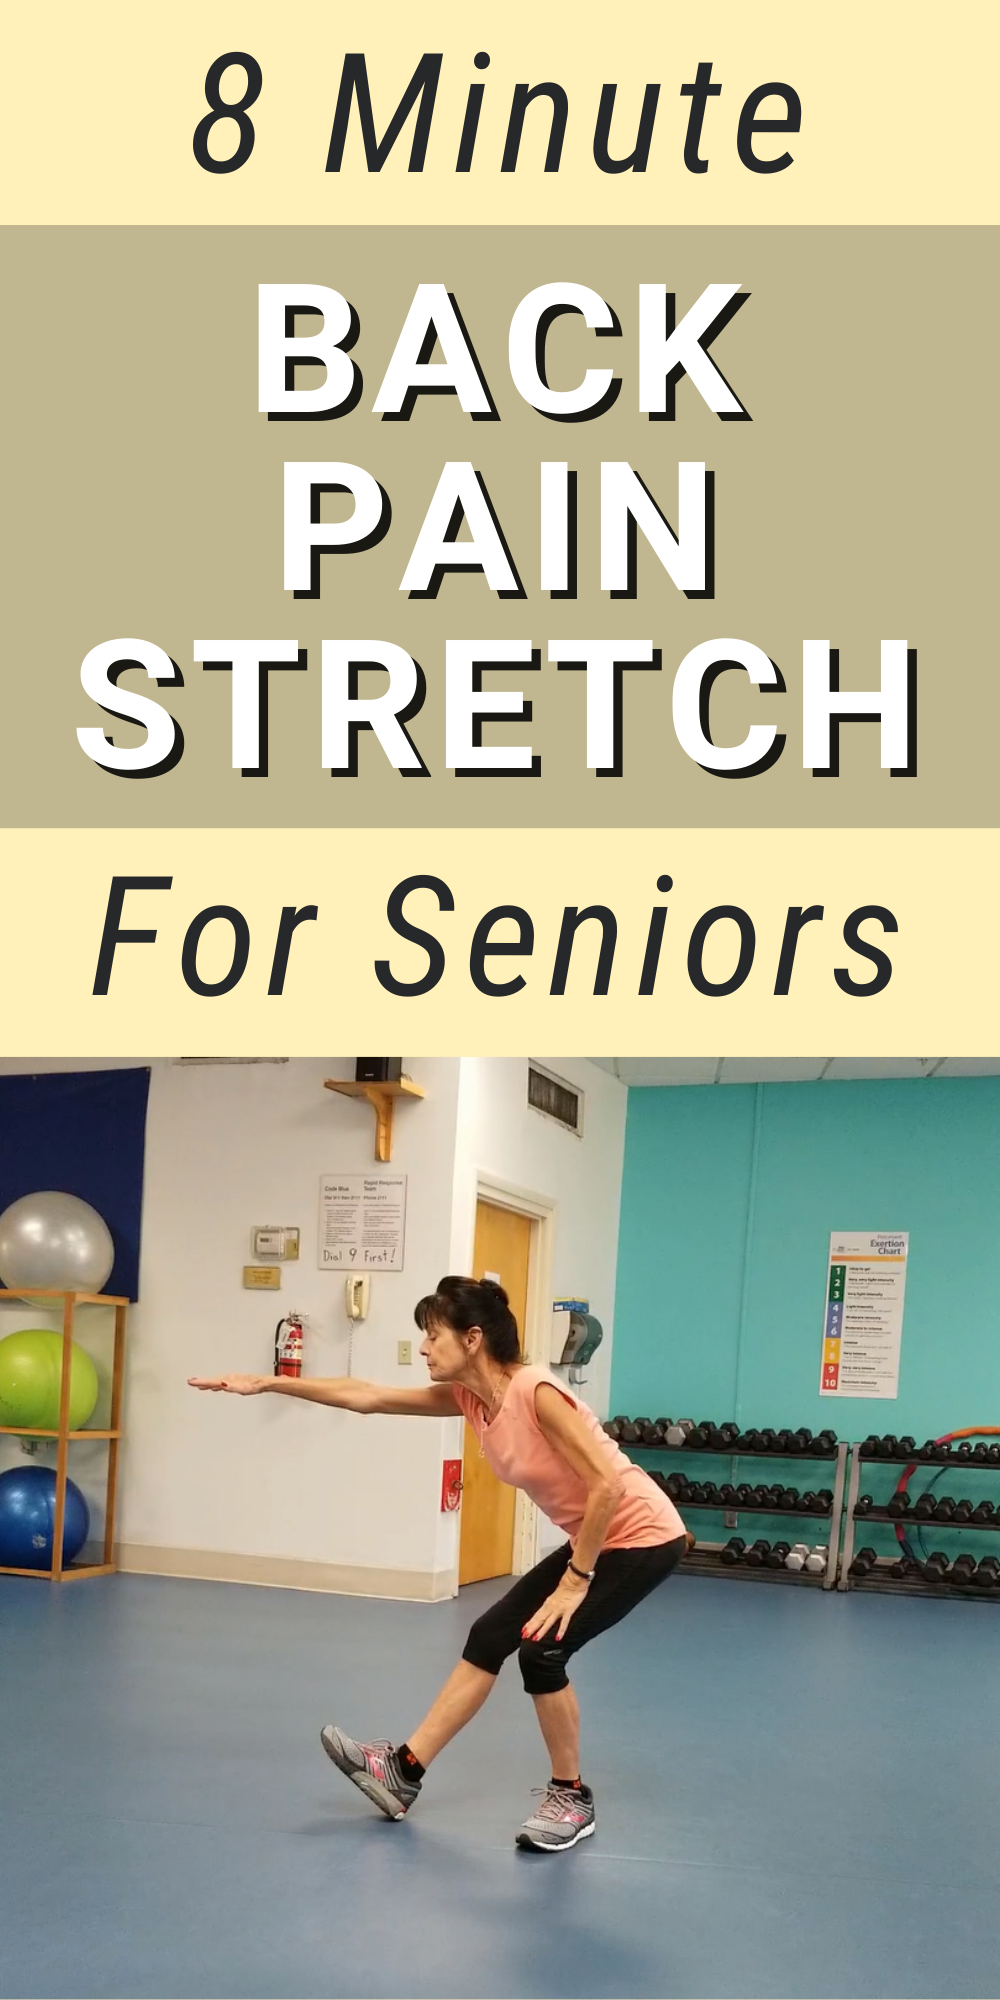 Back Pain Stretches